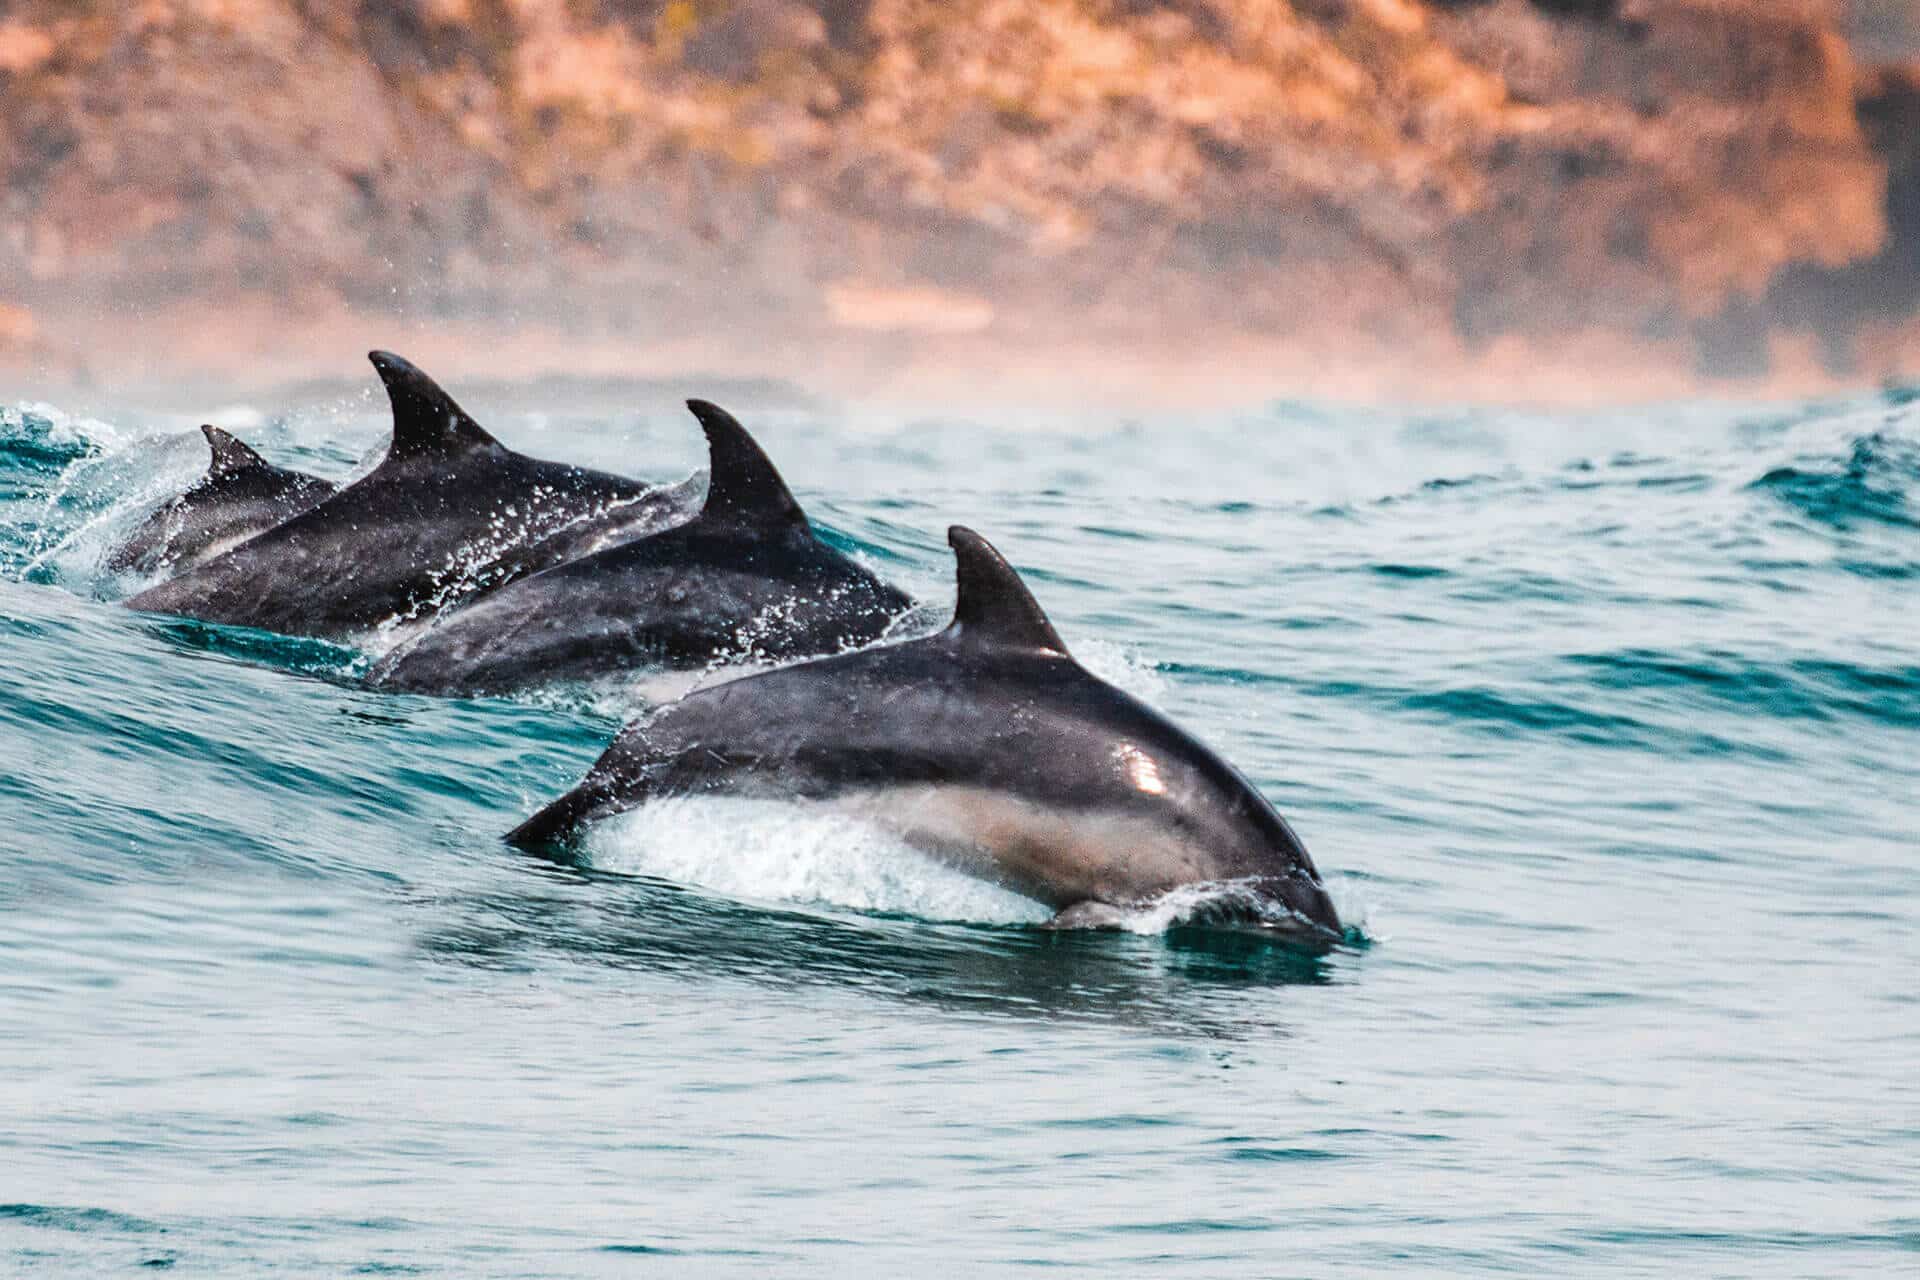 Four dolphins jump through the waves in Plettenberg Bay located in South Africa's Garden Route